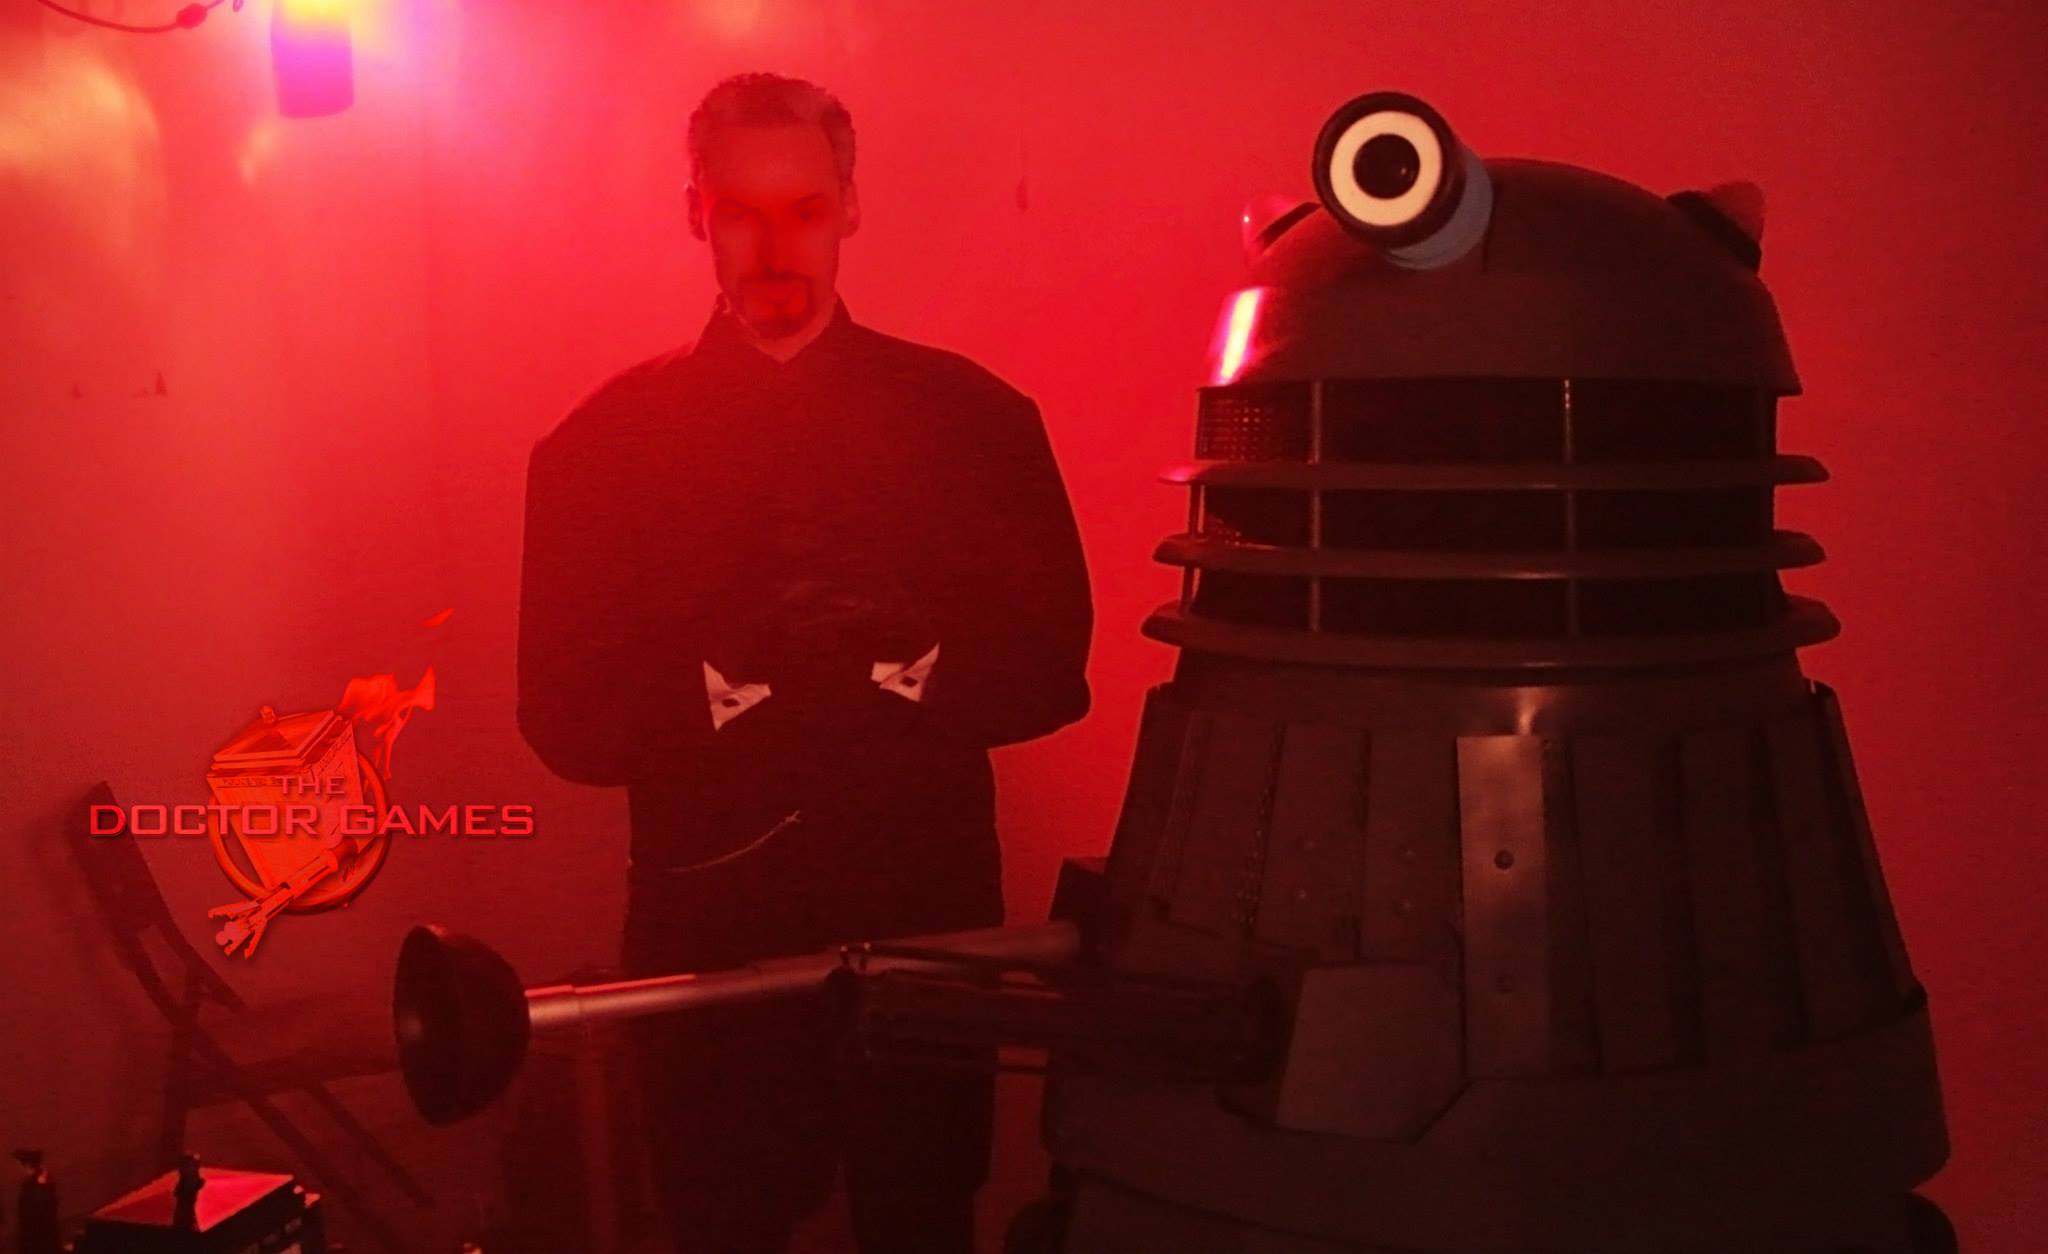 'The Doctor Games' Directed by Brad Hanson